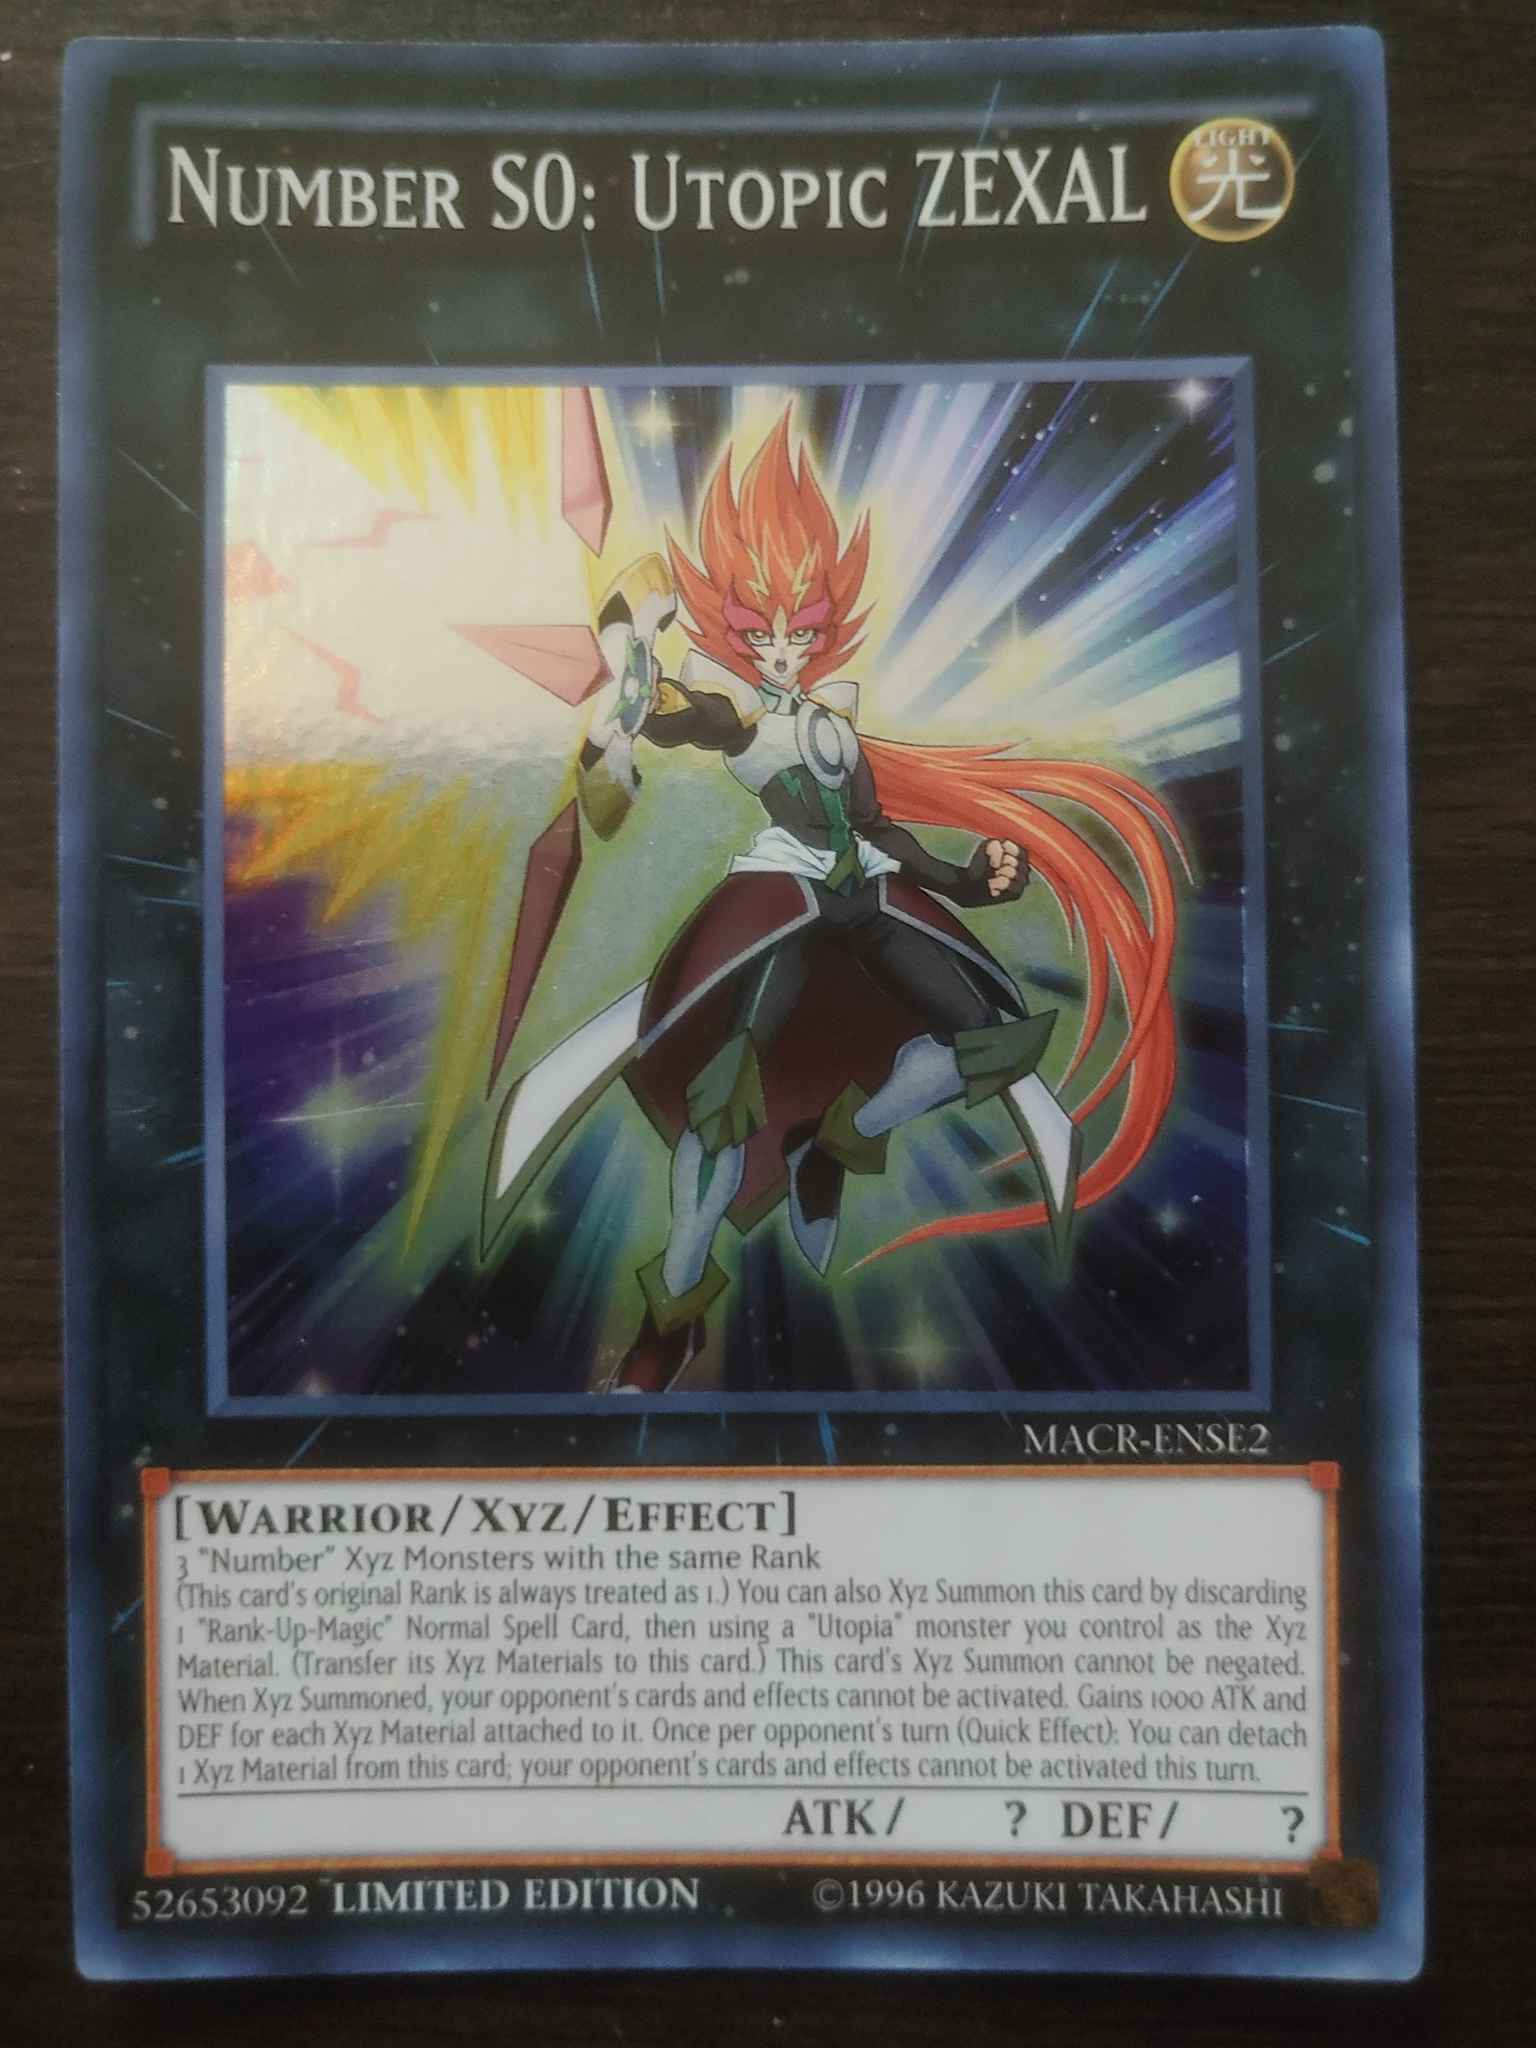 MACR-ENSE2 1X NM Number S0 Super Rare Limited Edition yugioh Utopic ZEXAL 